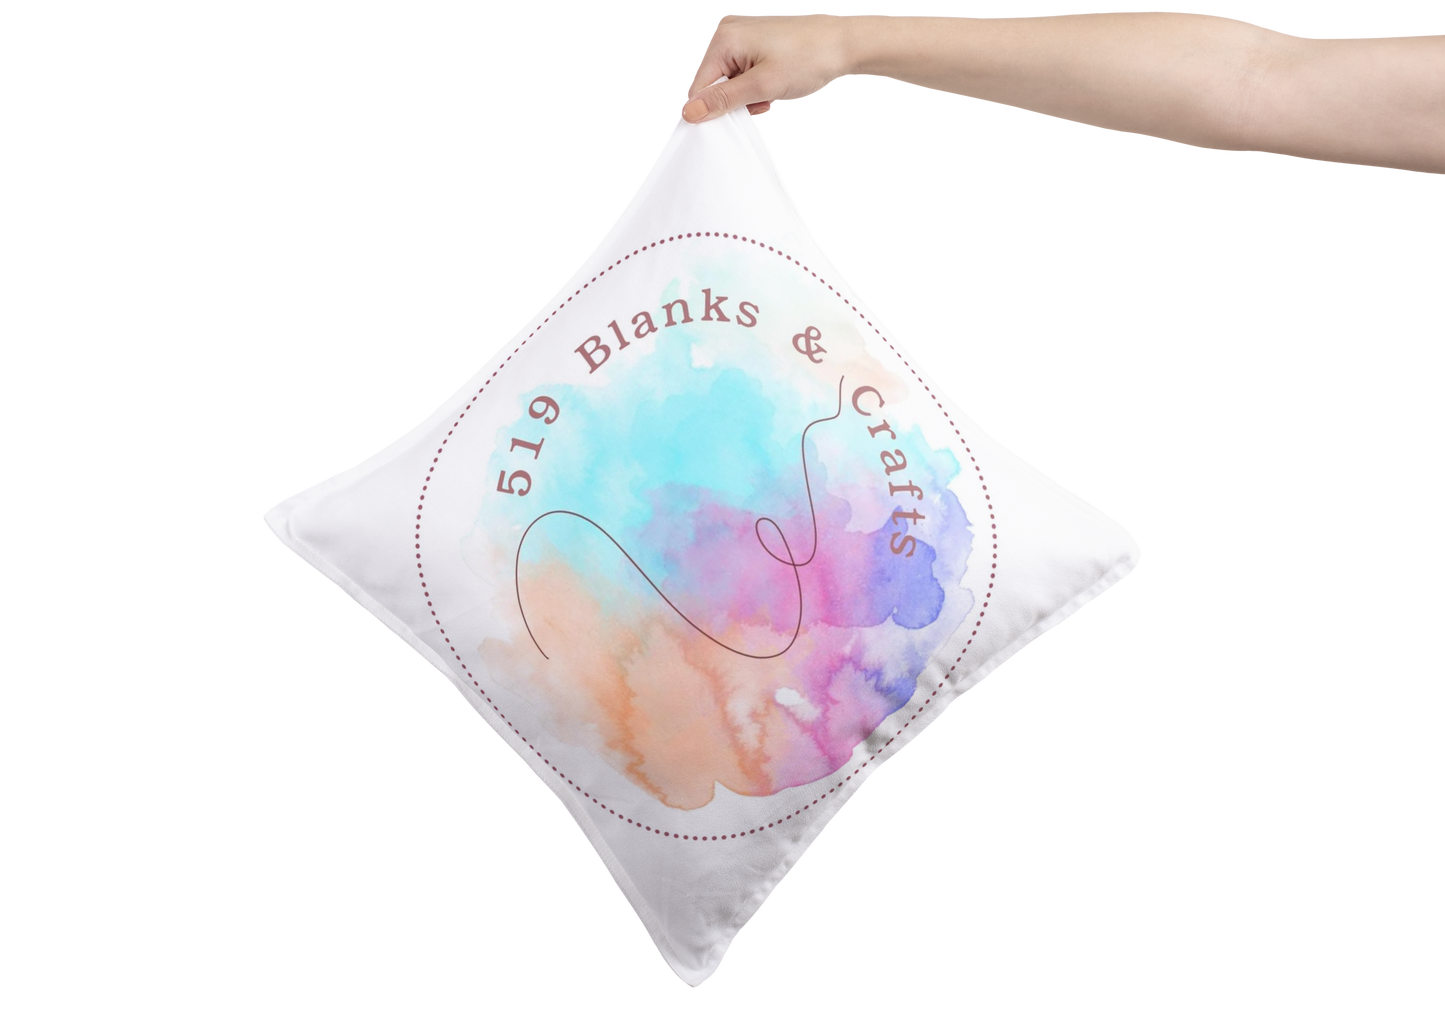 Personalized Pillow Cases